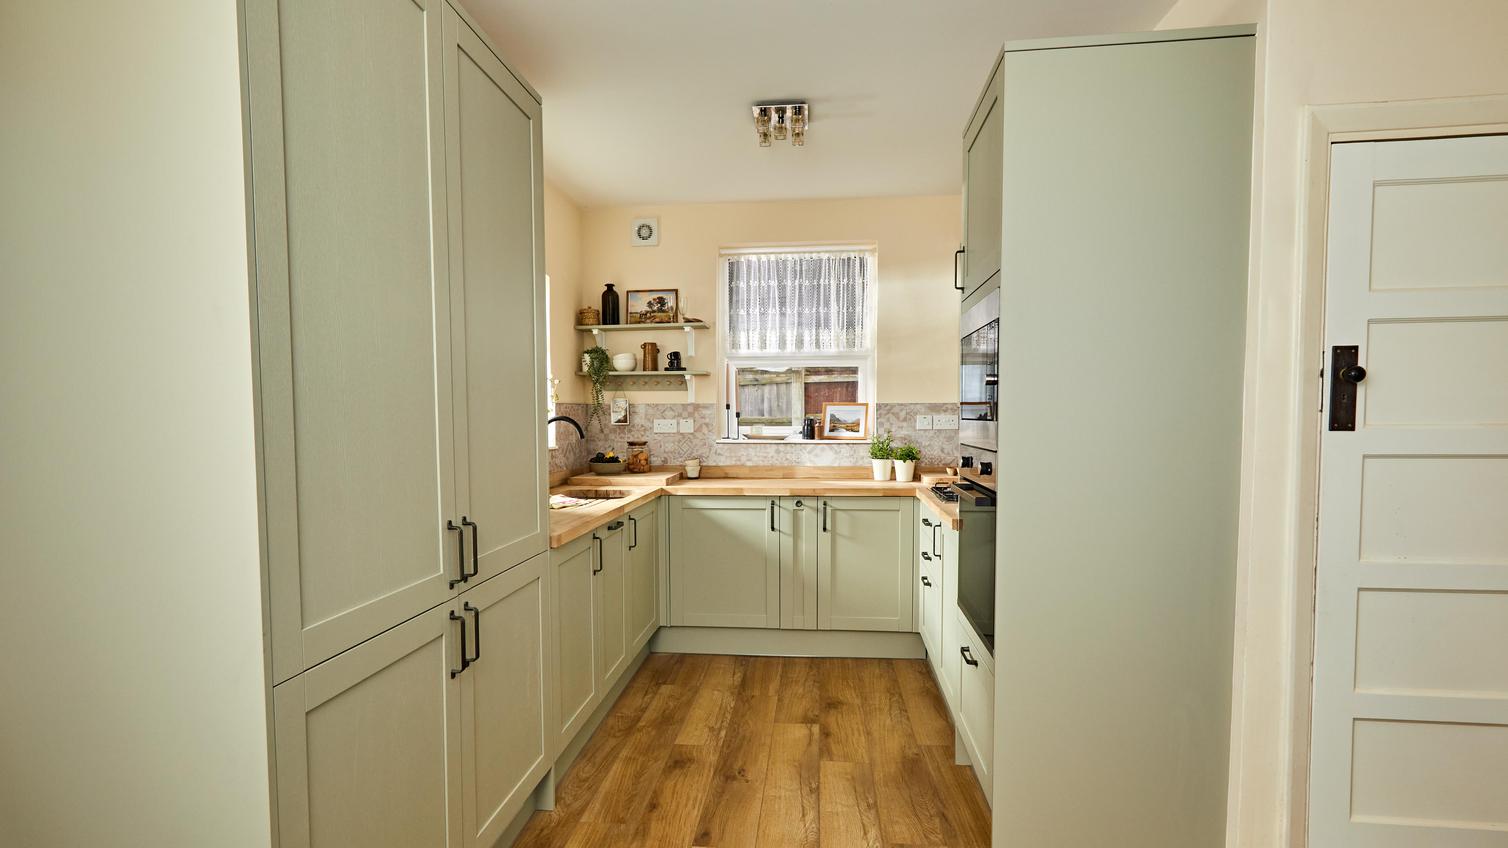 A U-shaped kitchen layout featuring sage-green cupboard doors in a shaker design, black handles, and timber worktops.